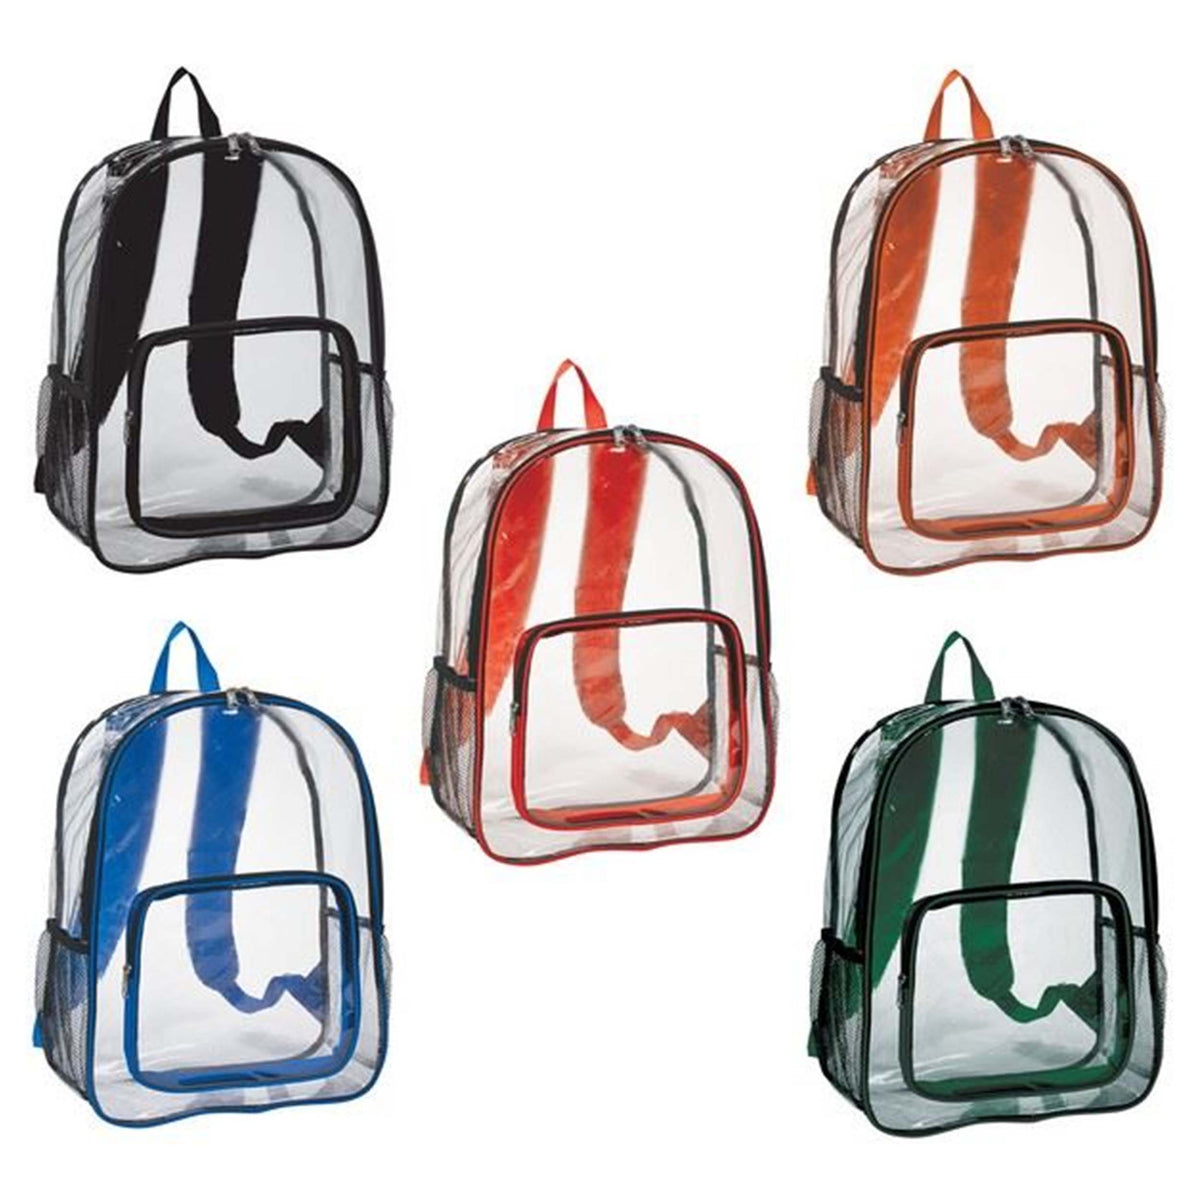 Clear Backpack - 13" x 18" x 6" inch